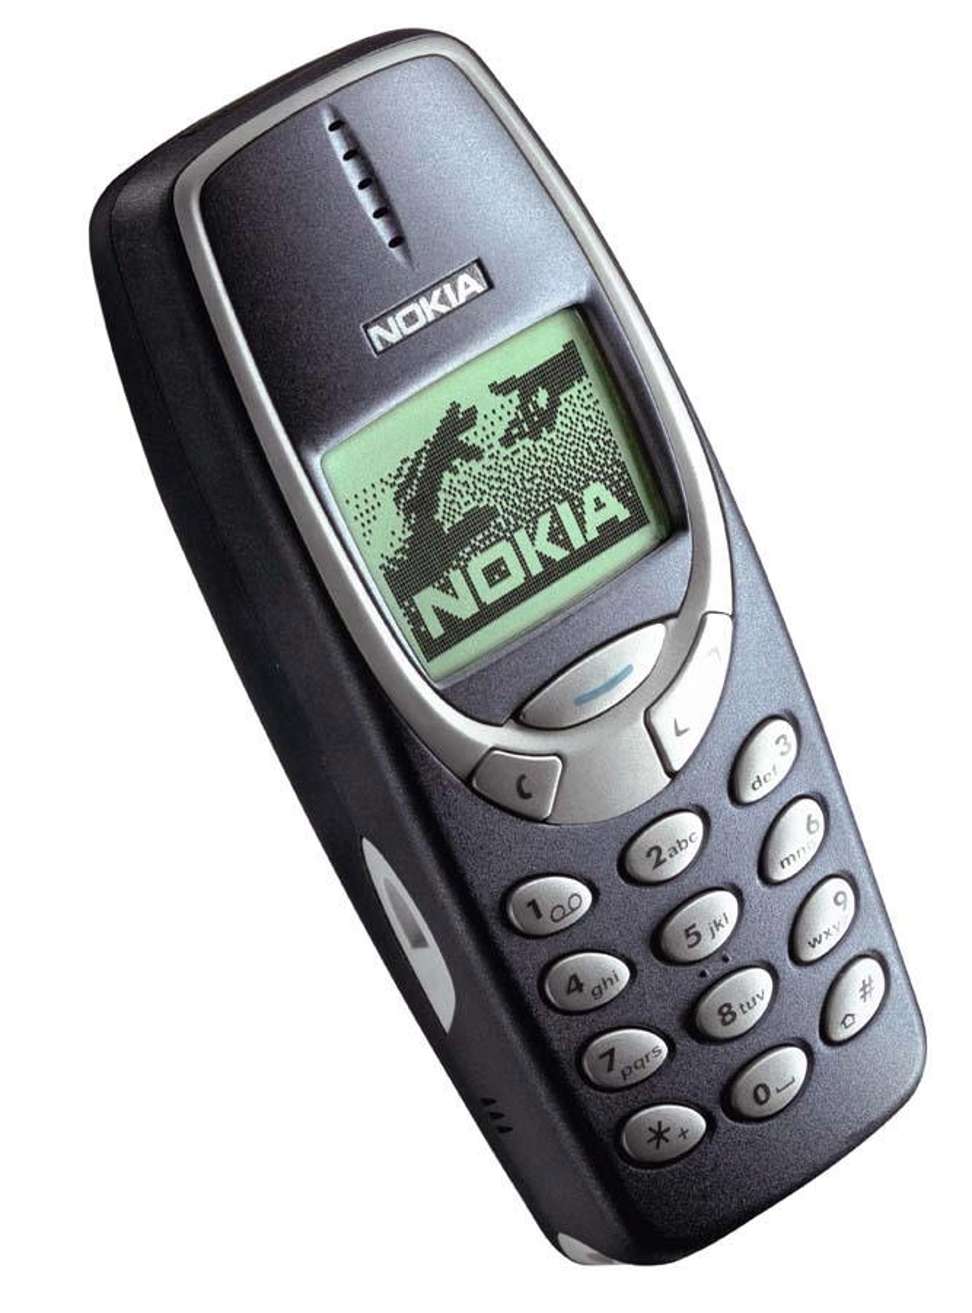 The Nokia 3310 and its reputation of indestructibility - Android Authority